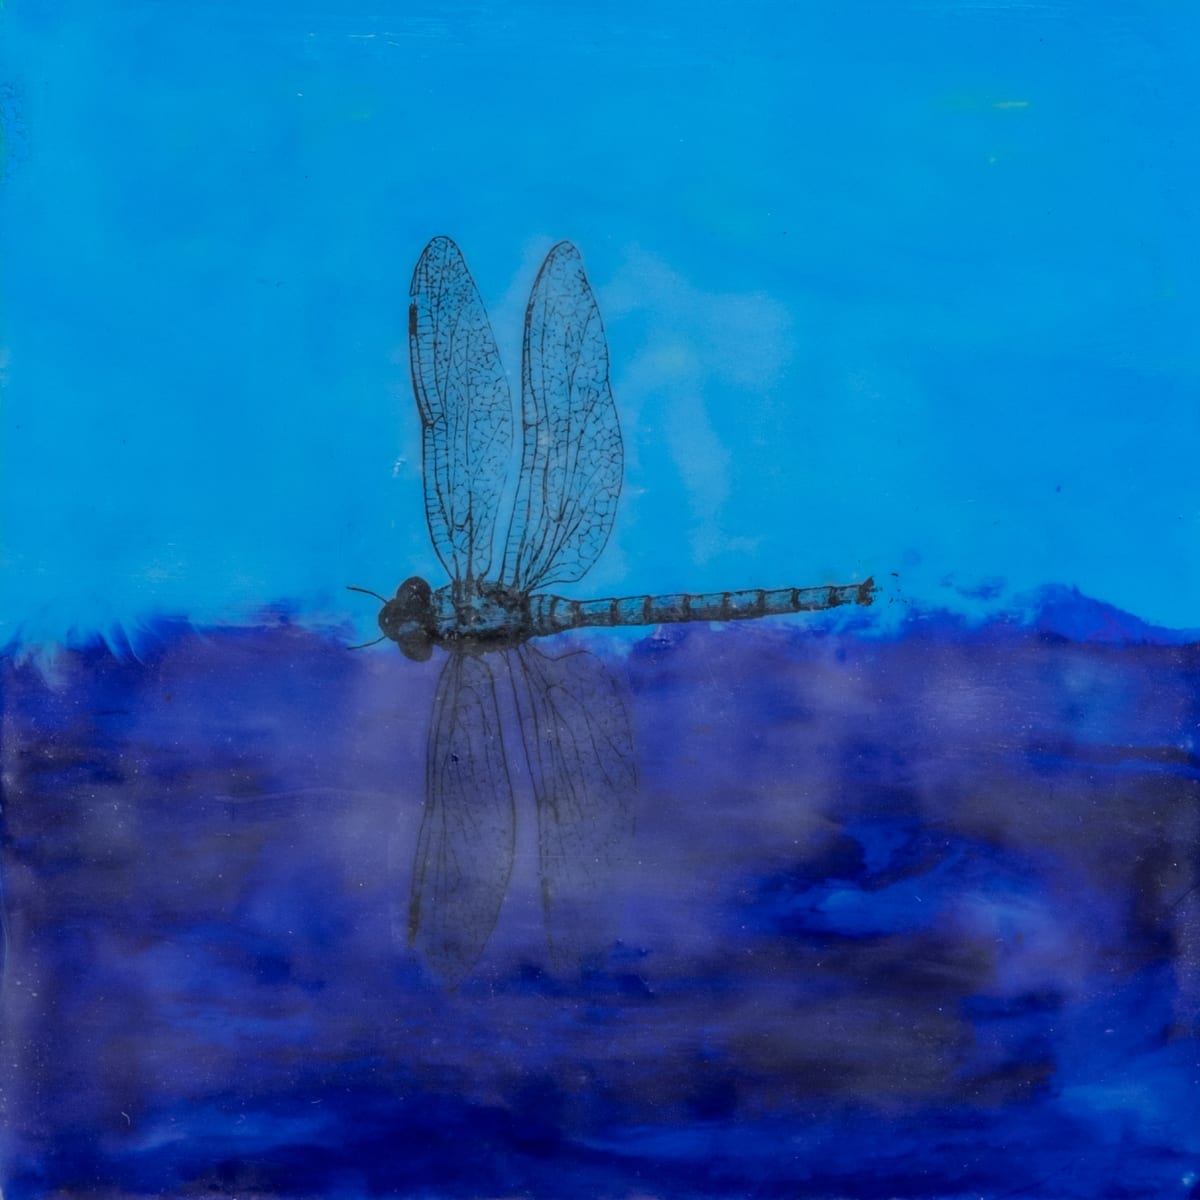 Dragonfly Sky by Kathie Collinson  Image: Dragonfly flying between water and sky